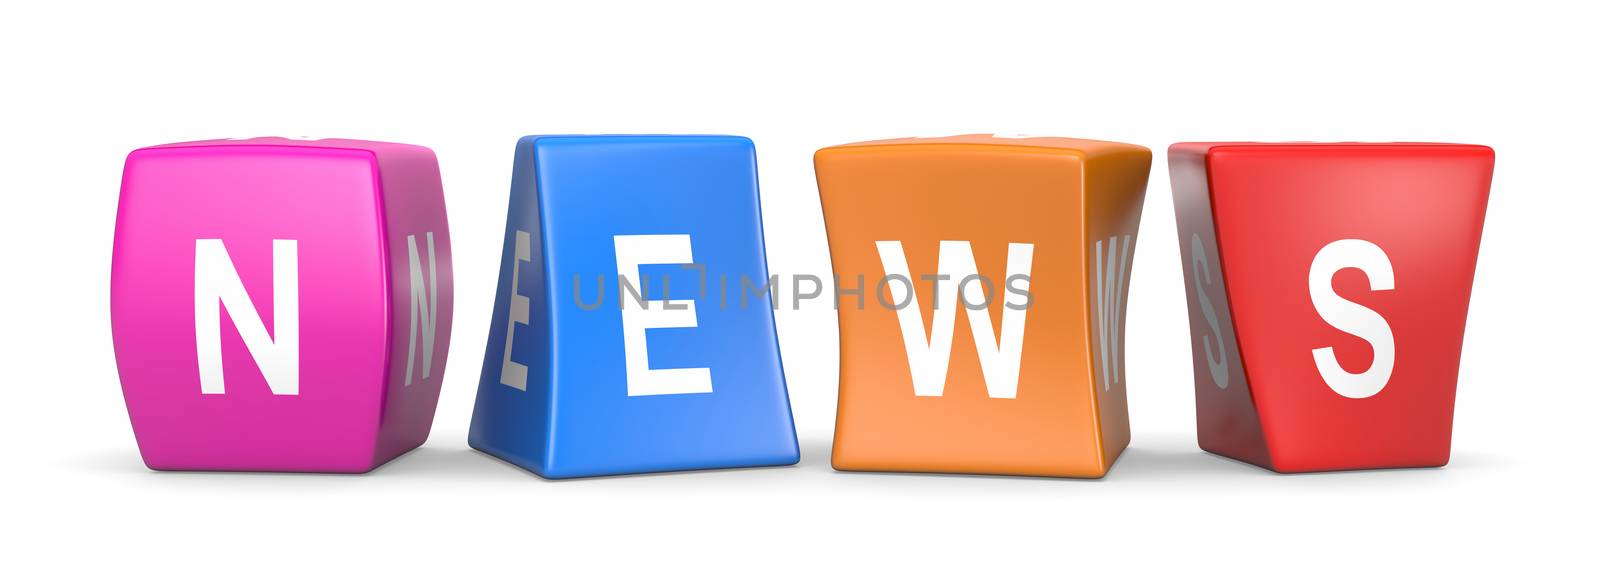 News White Text on Colorful Deformed Funny Cubes 3D Illustration on White Background